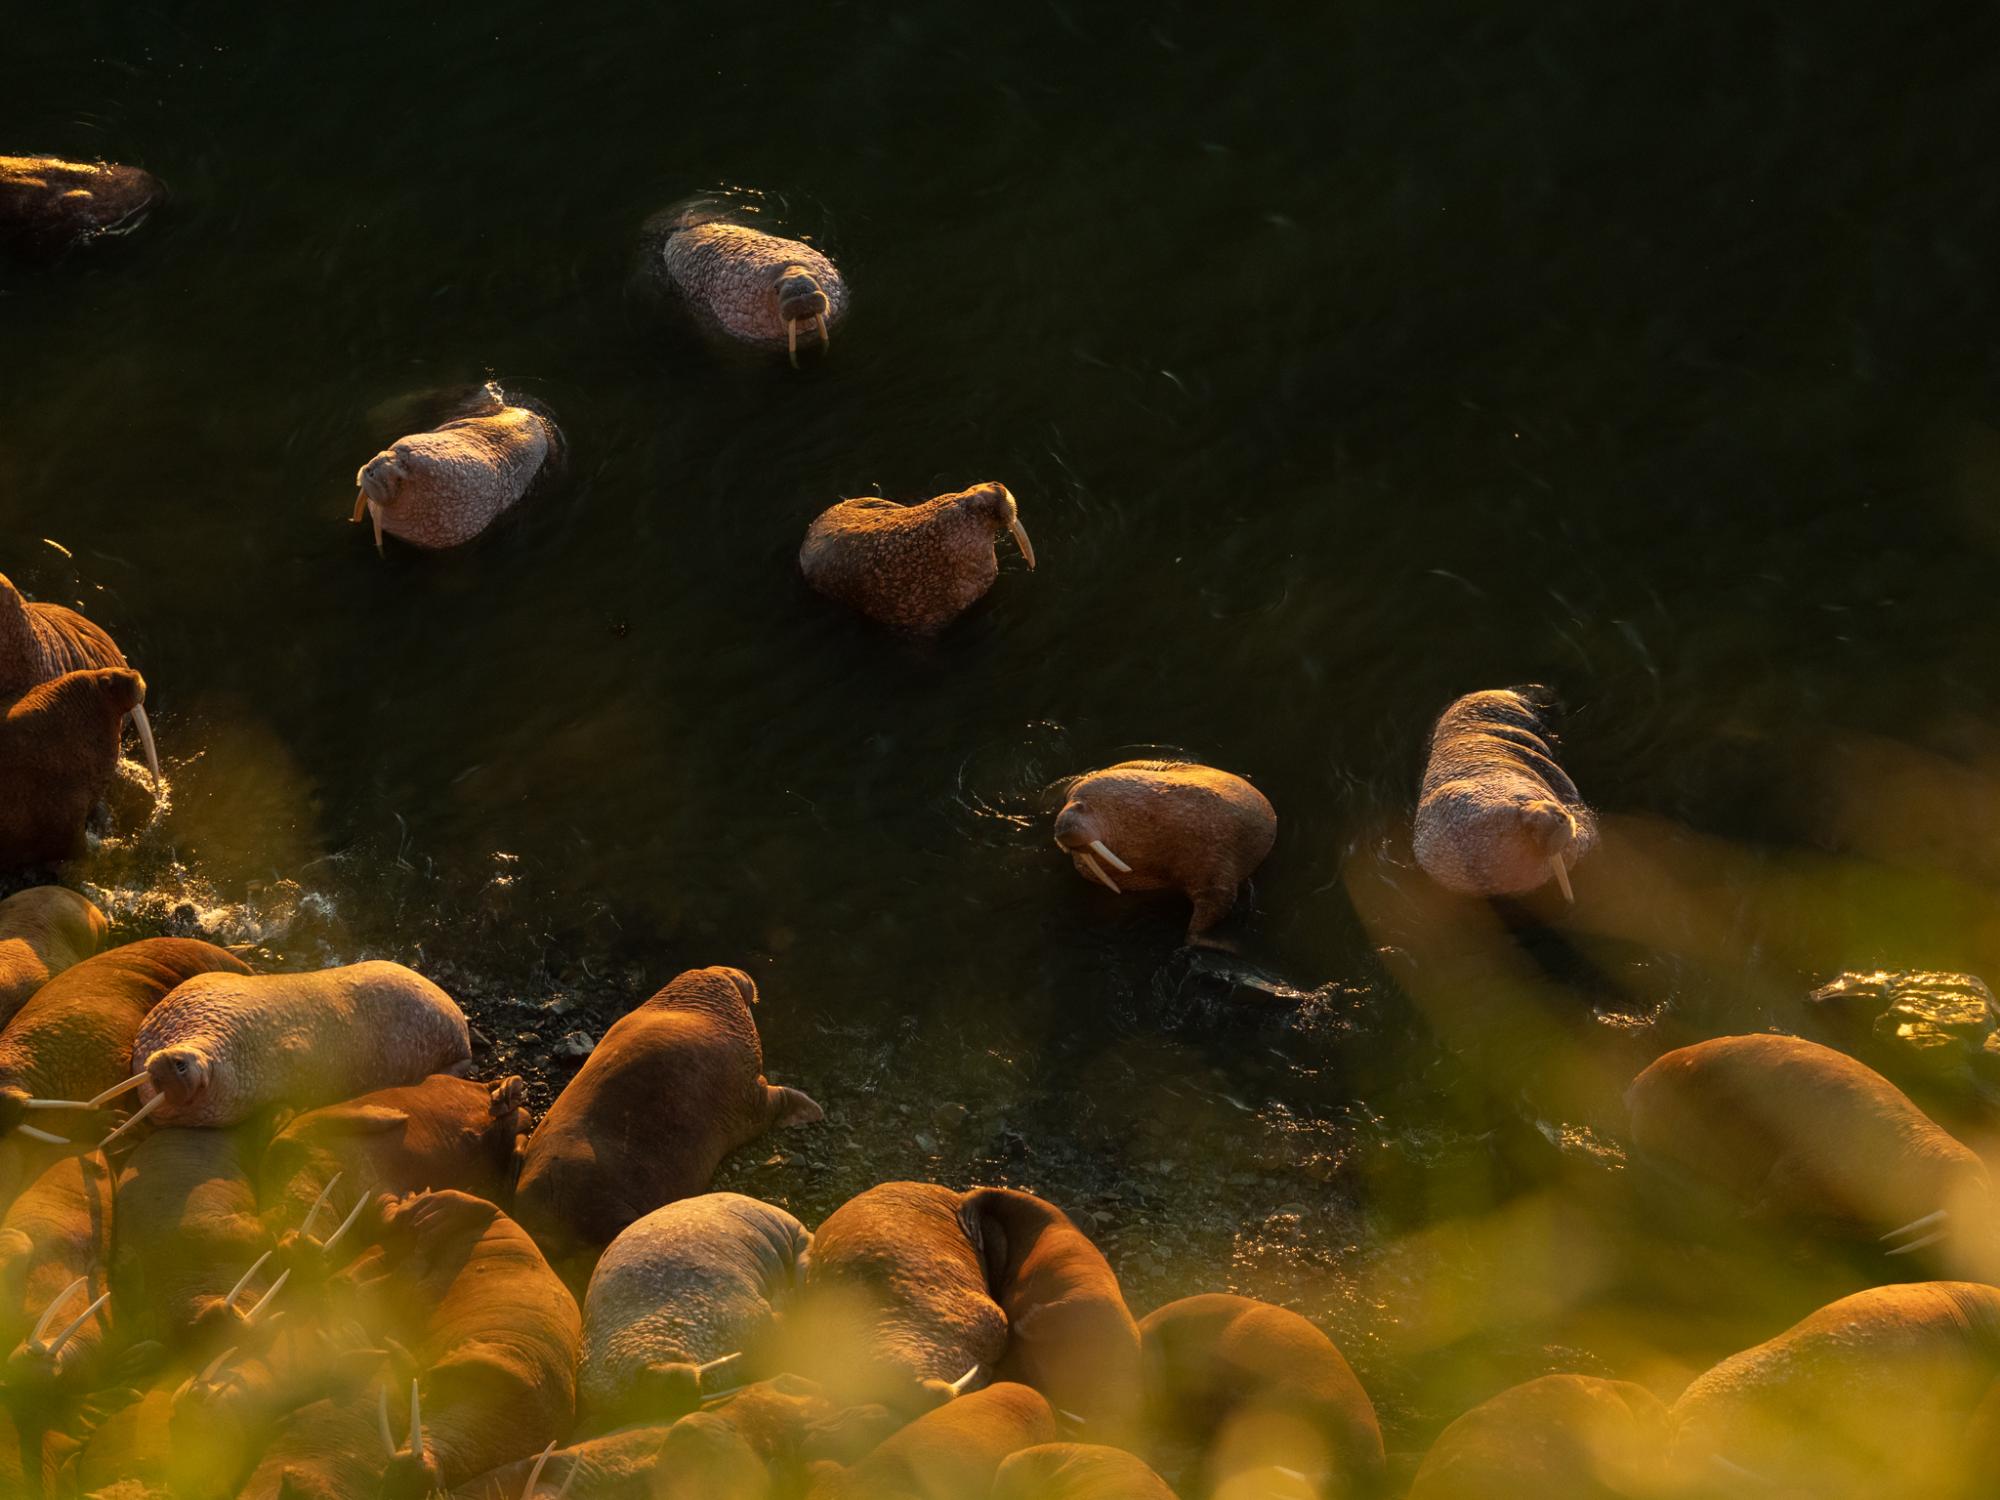 At sunrise, Pacific walrus approach the shore to join a haul-out on Main Beach, Round Island. Since the sanctuary was established in 1960, a summer program allows small groups of visitors to camp on the island and observe walrus.